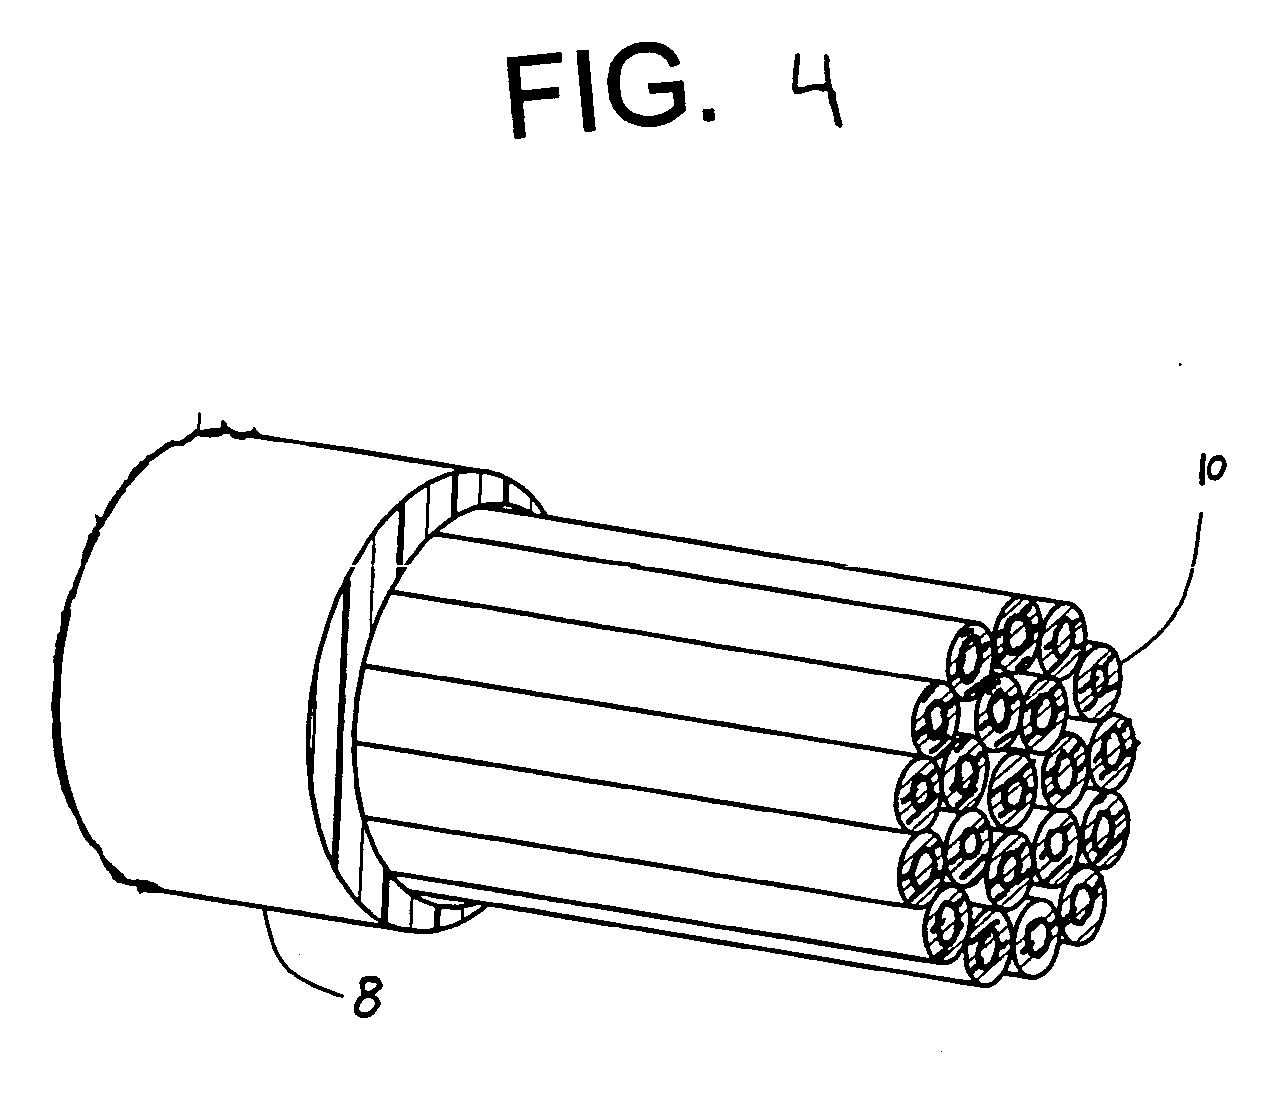 Flame retardant thermoplastic composition and articles comprising the same